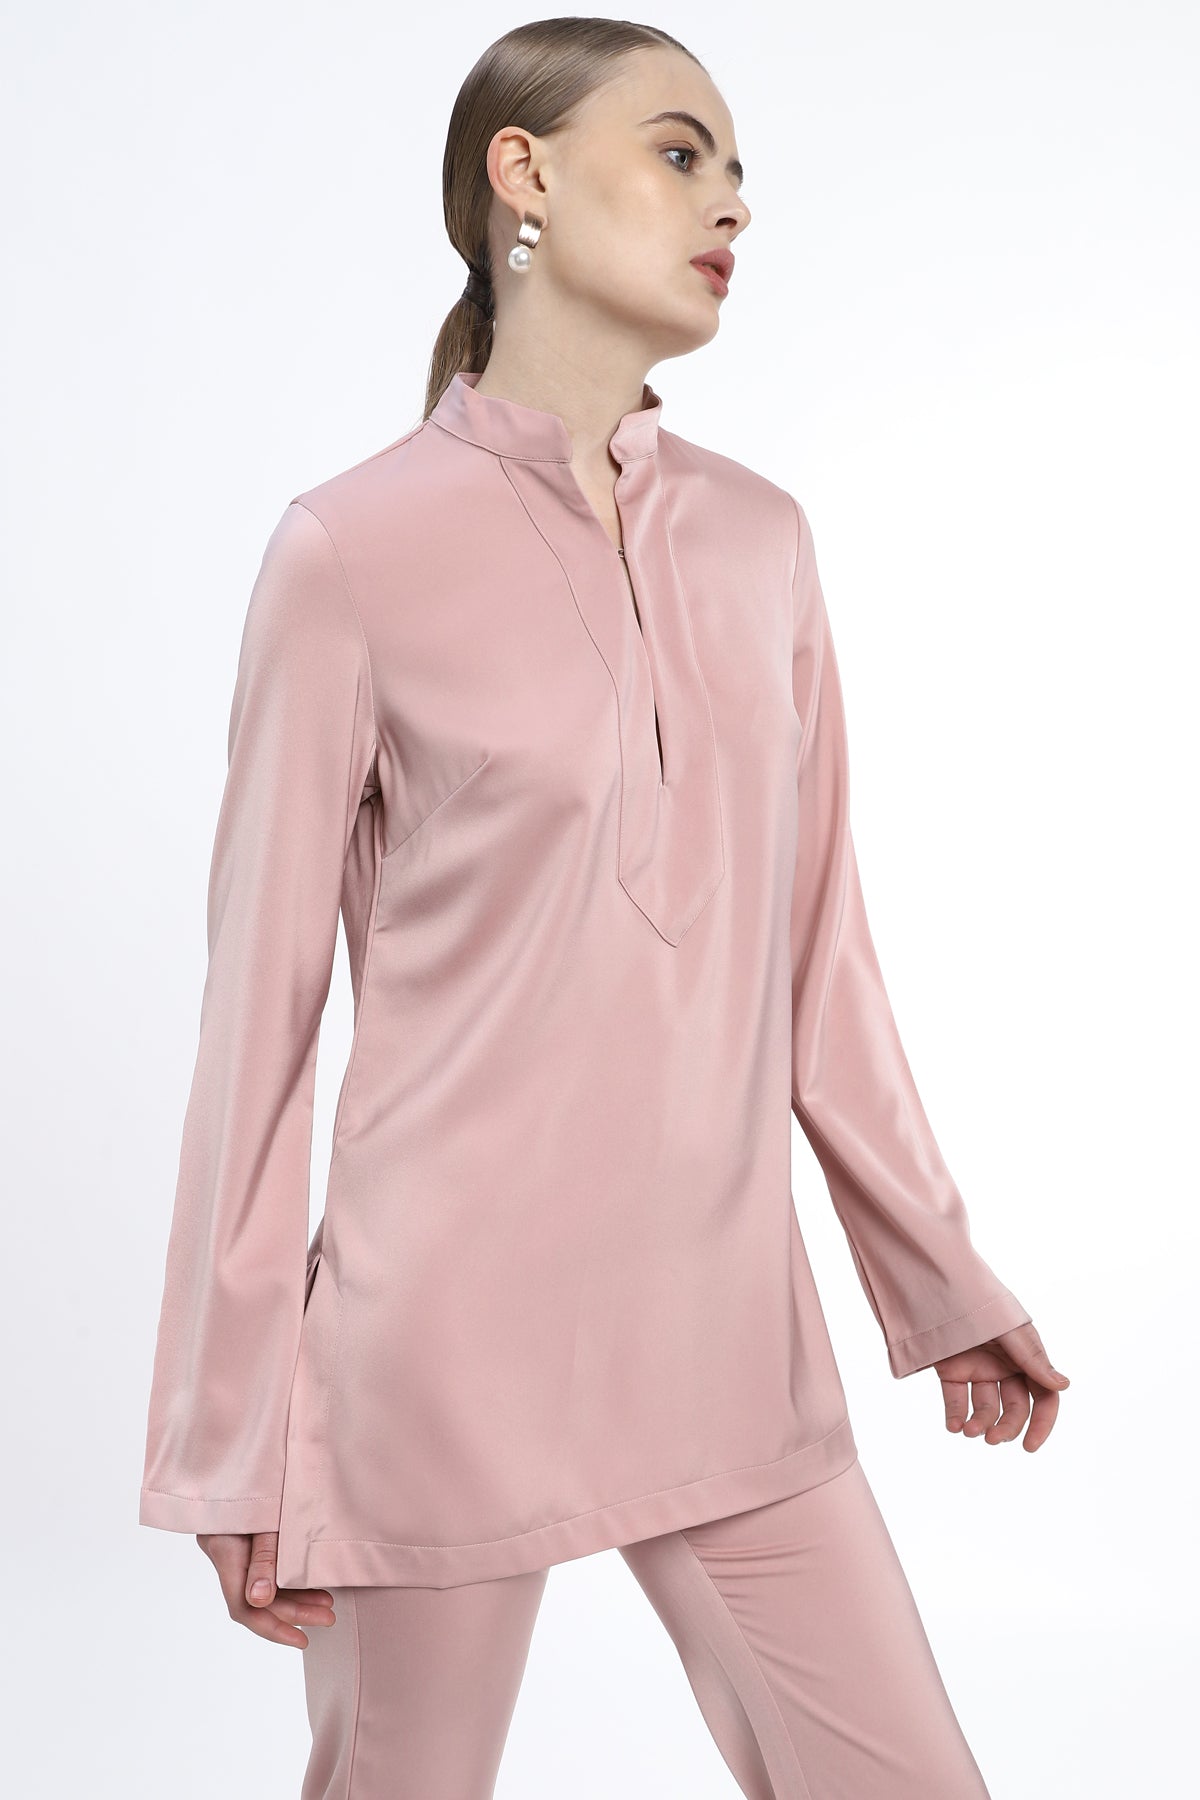 Classic long top with chinese collar in long sleeves